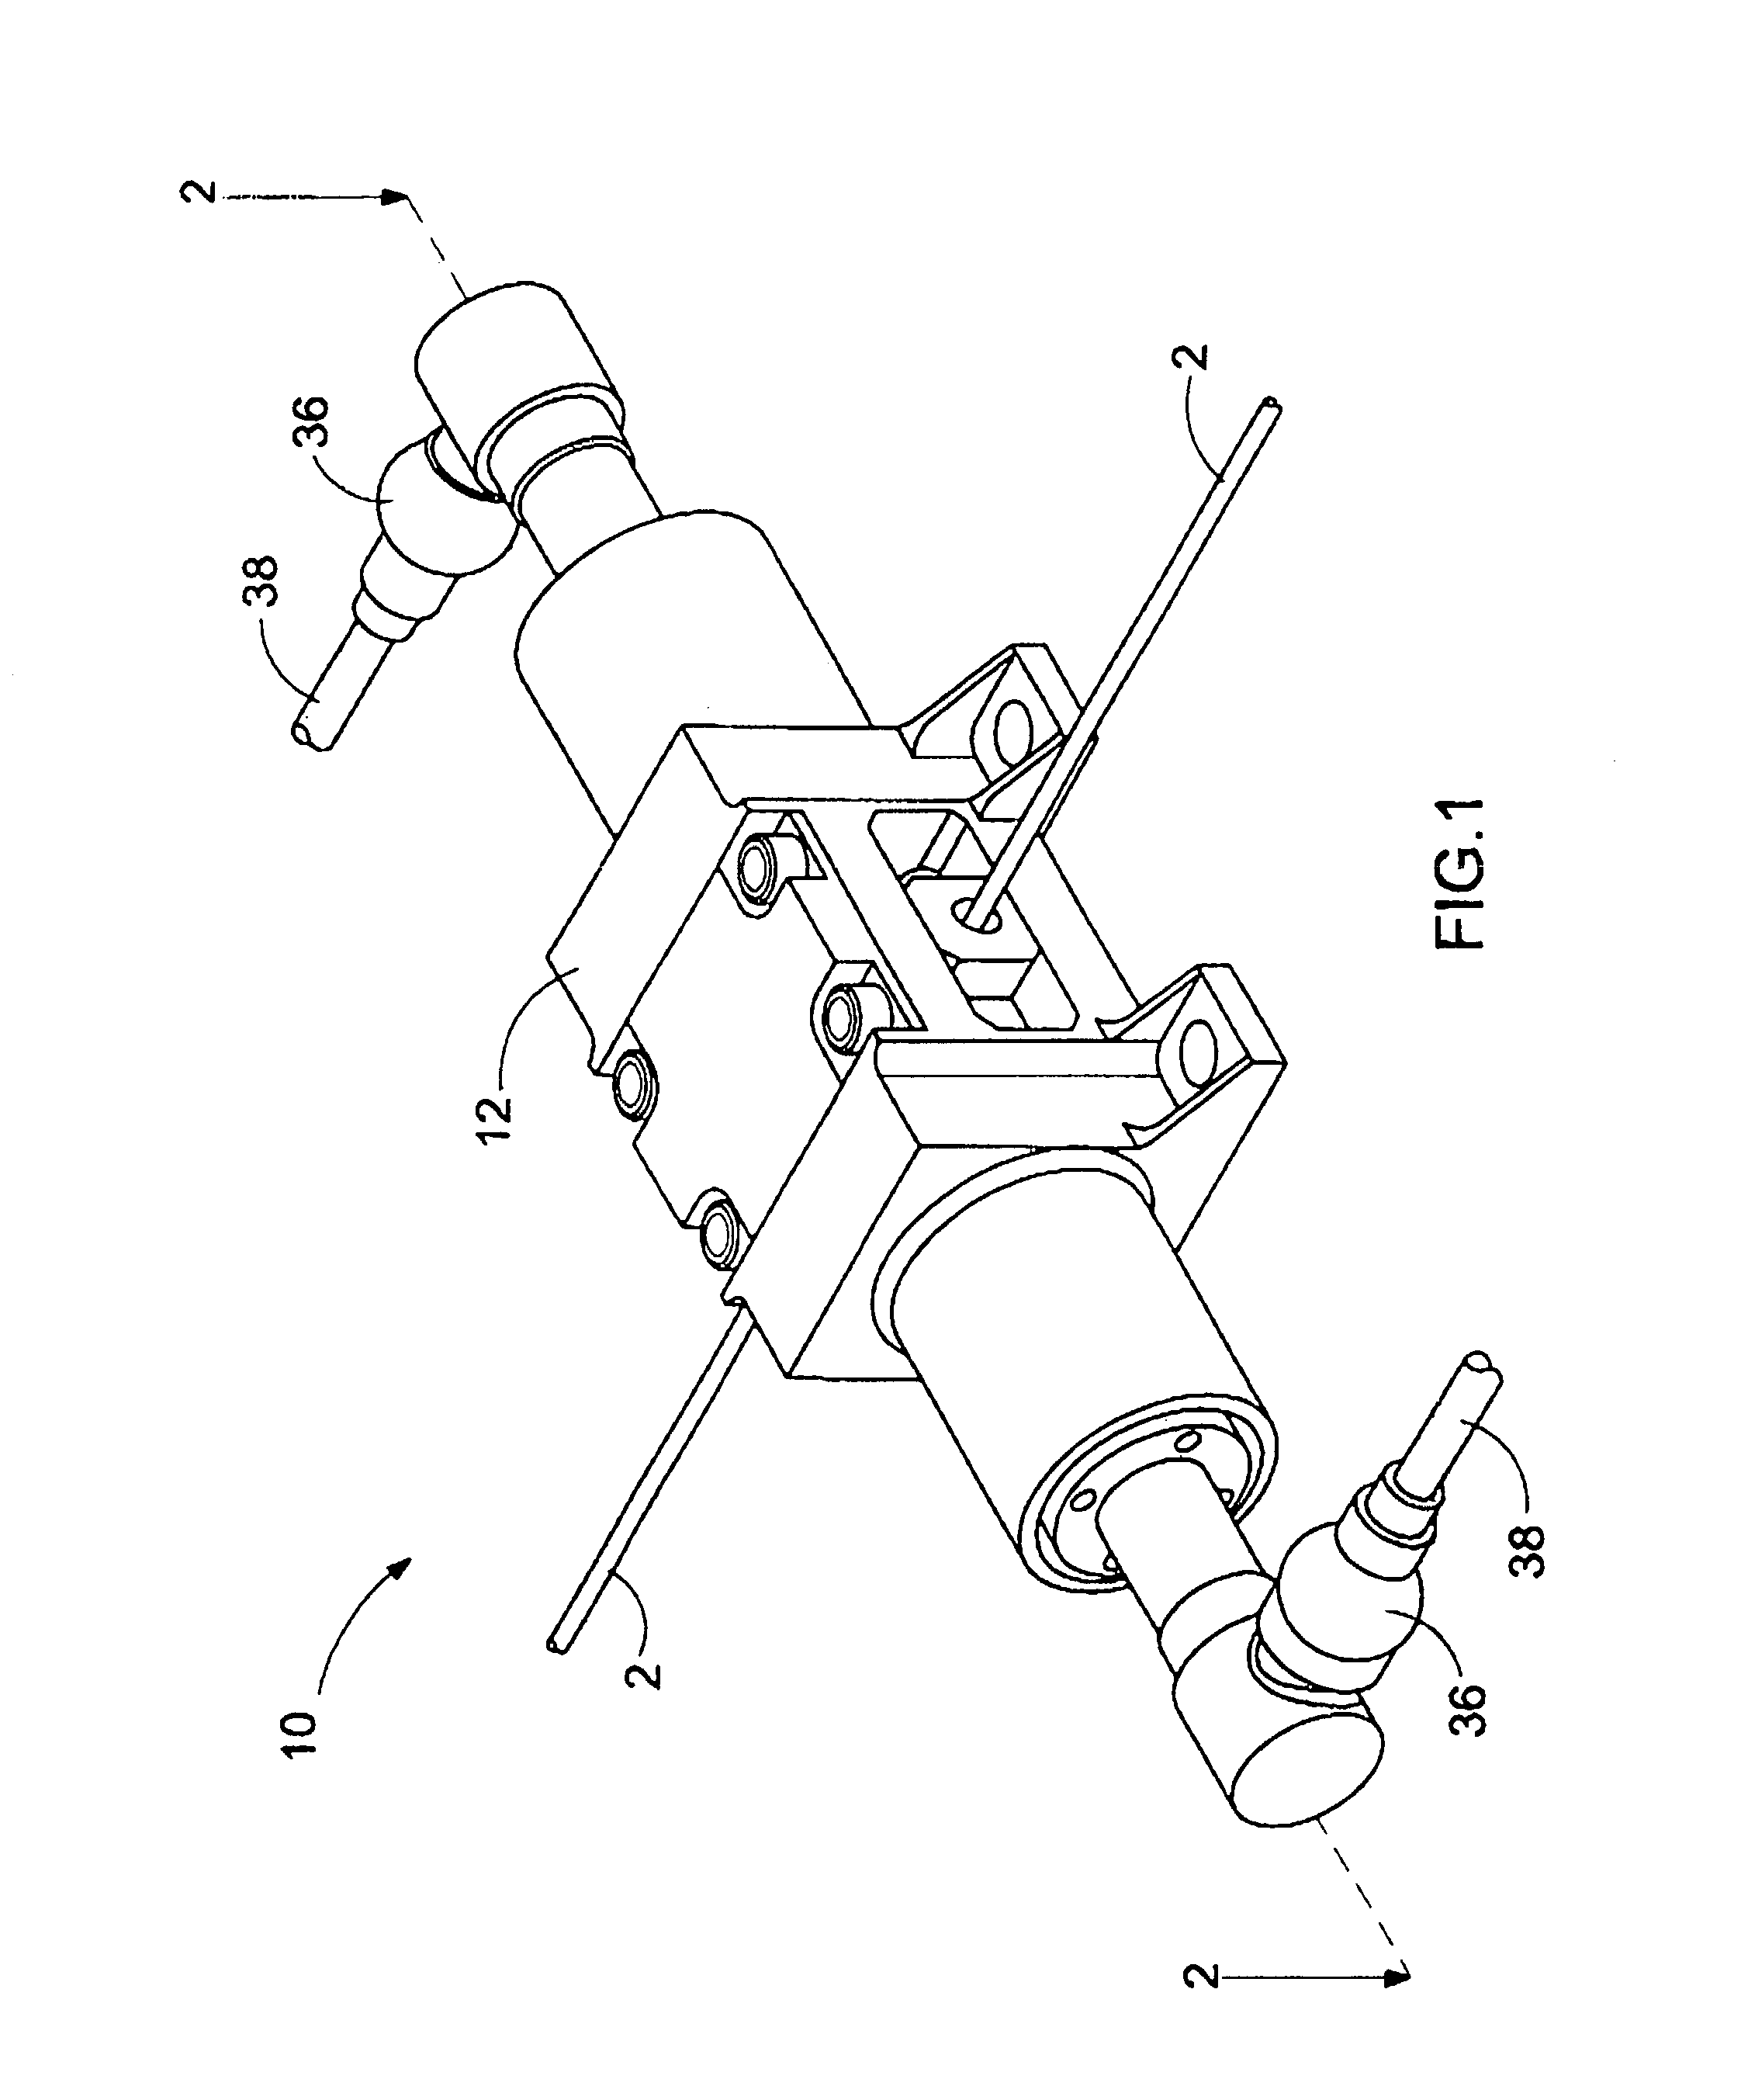 High-load capability non-explosive cable release mechanism